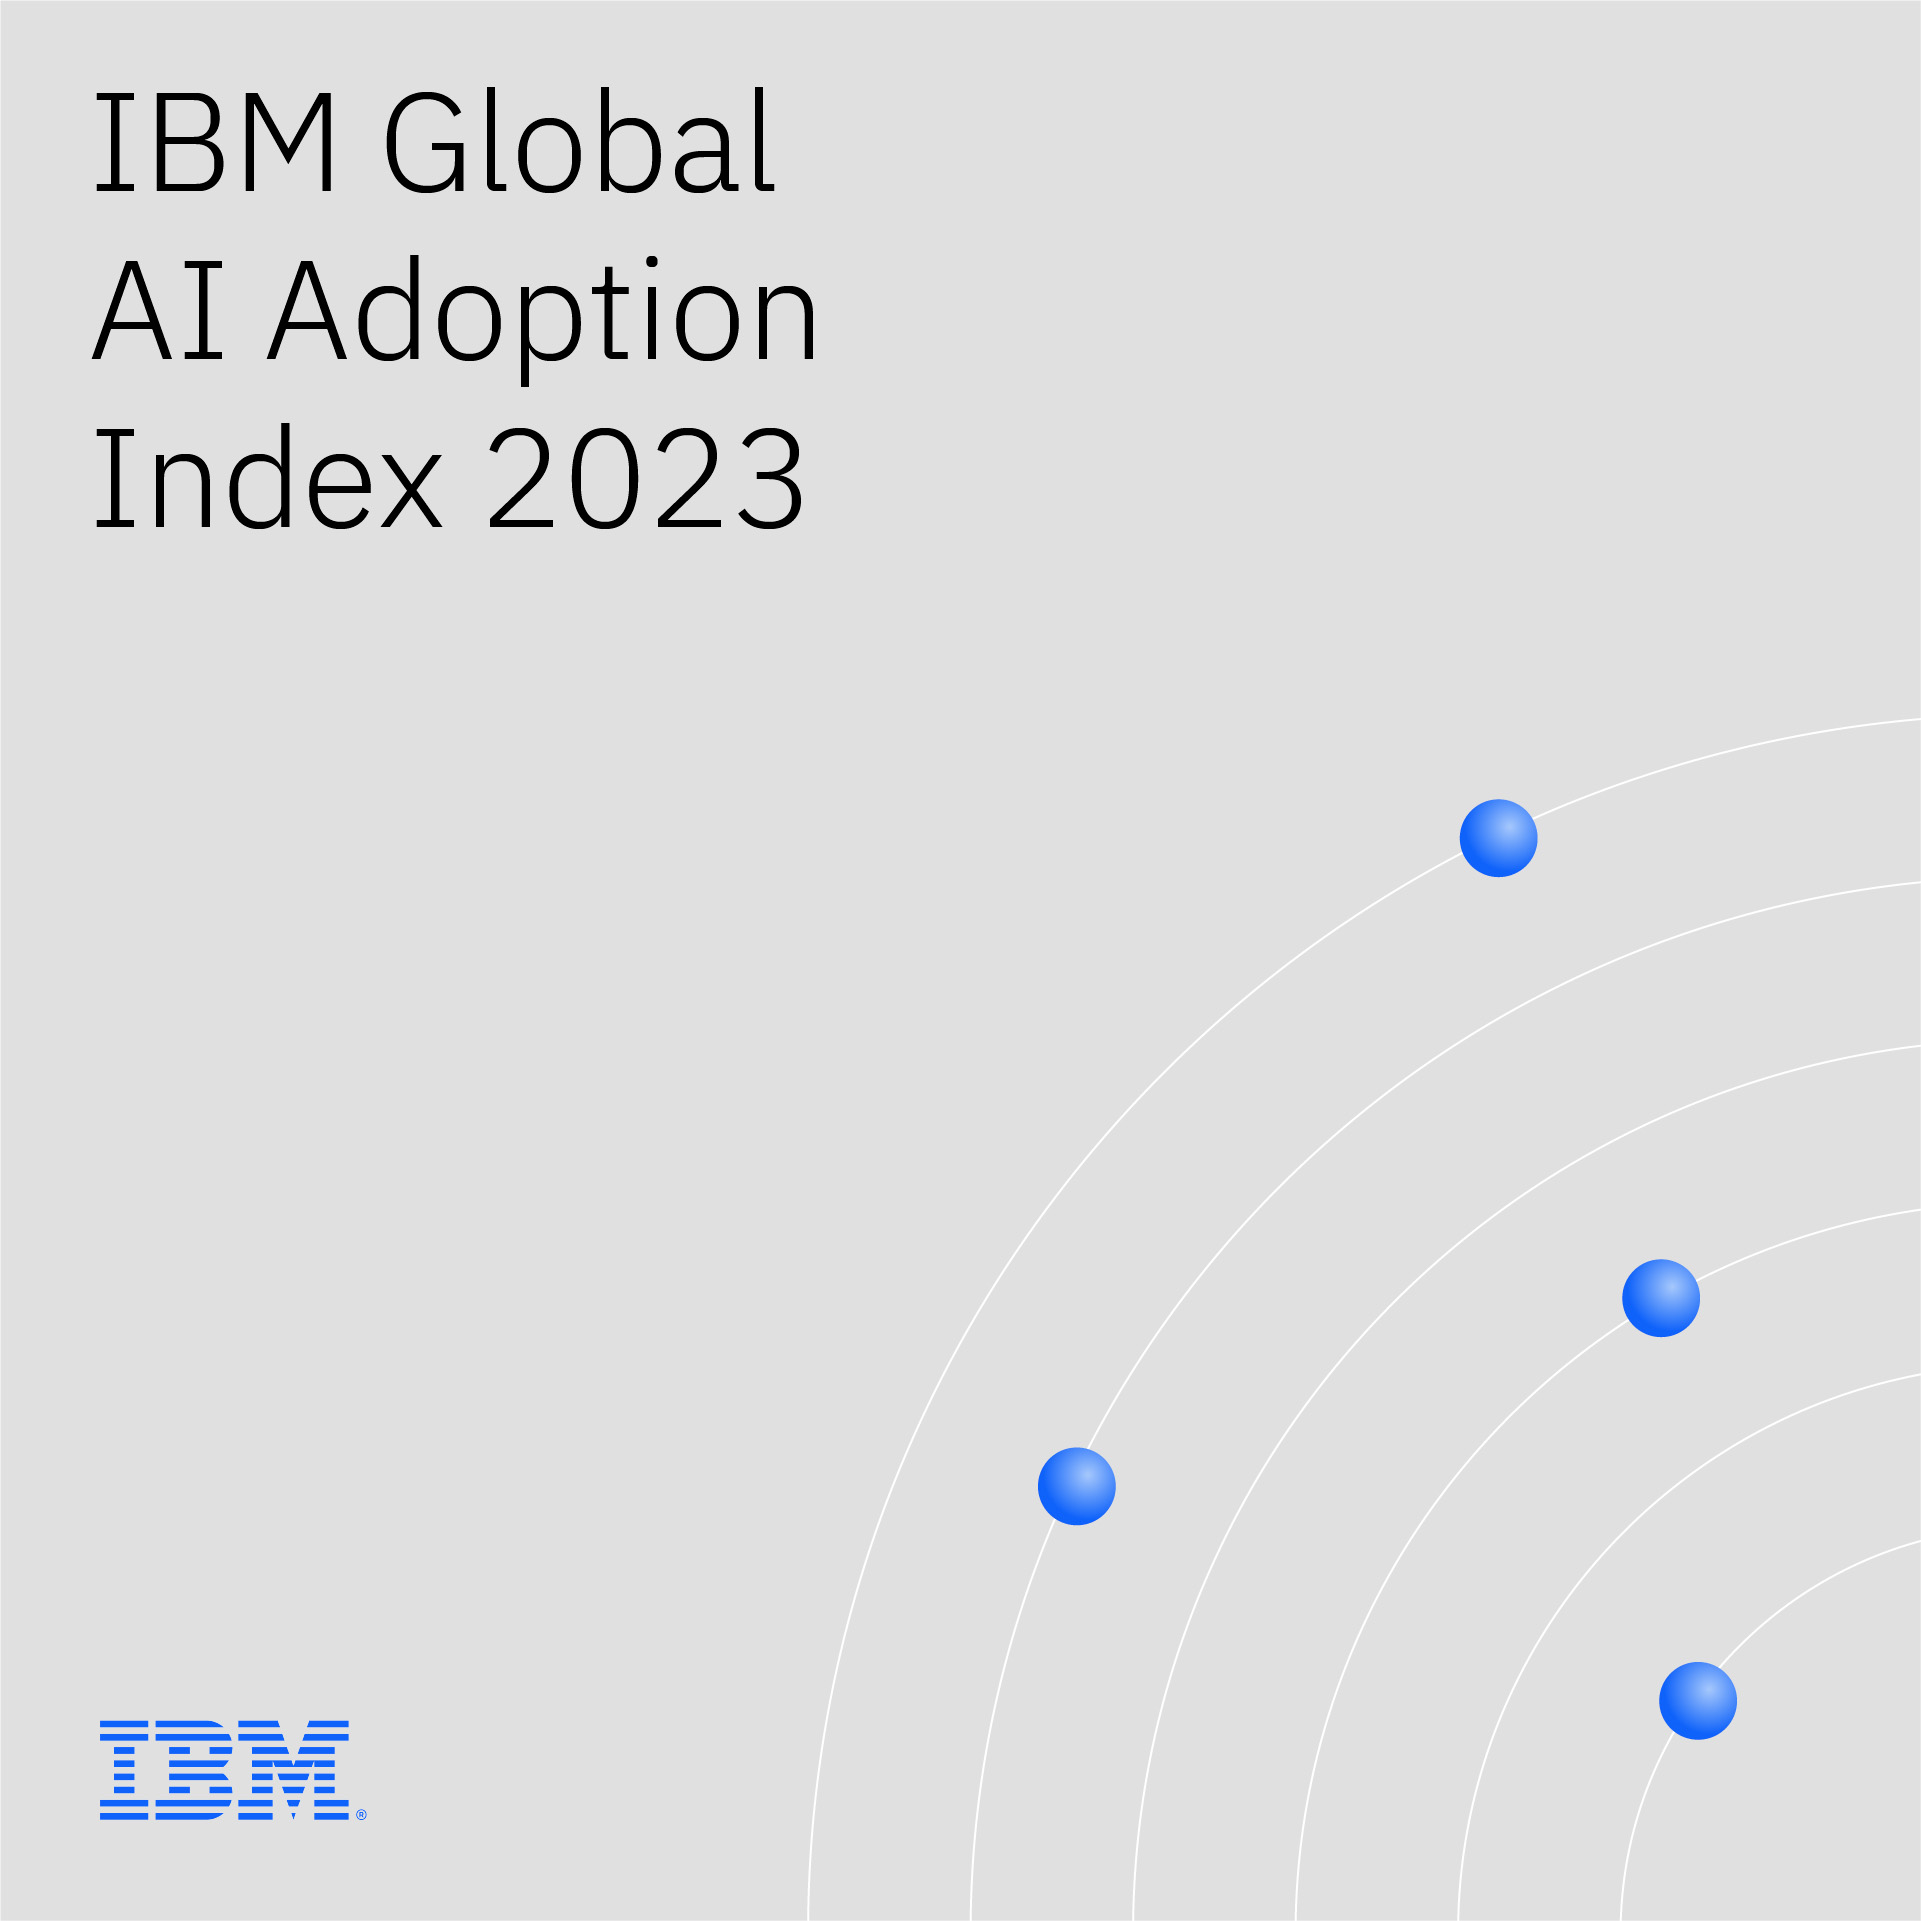 Data Suggests Growth in Enterprise Adoption of AI is Due to Widespread Deployment by Early Adopters, But Barriers Keep 40% in the Exploration and Experimentation Phases